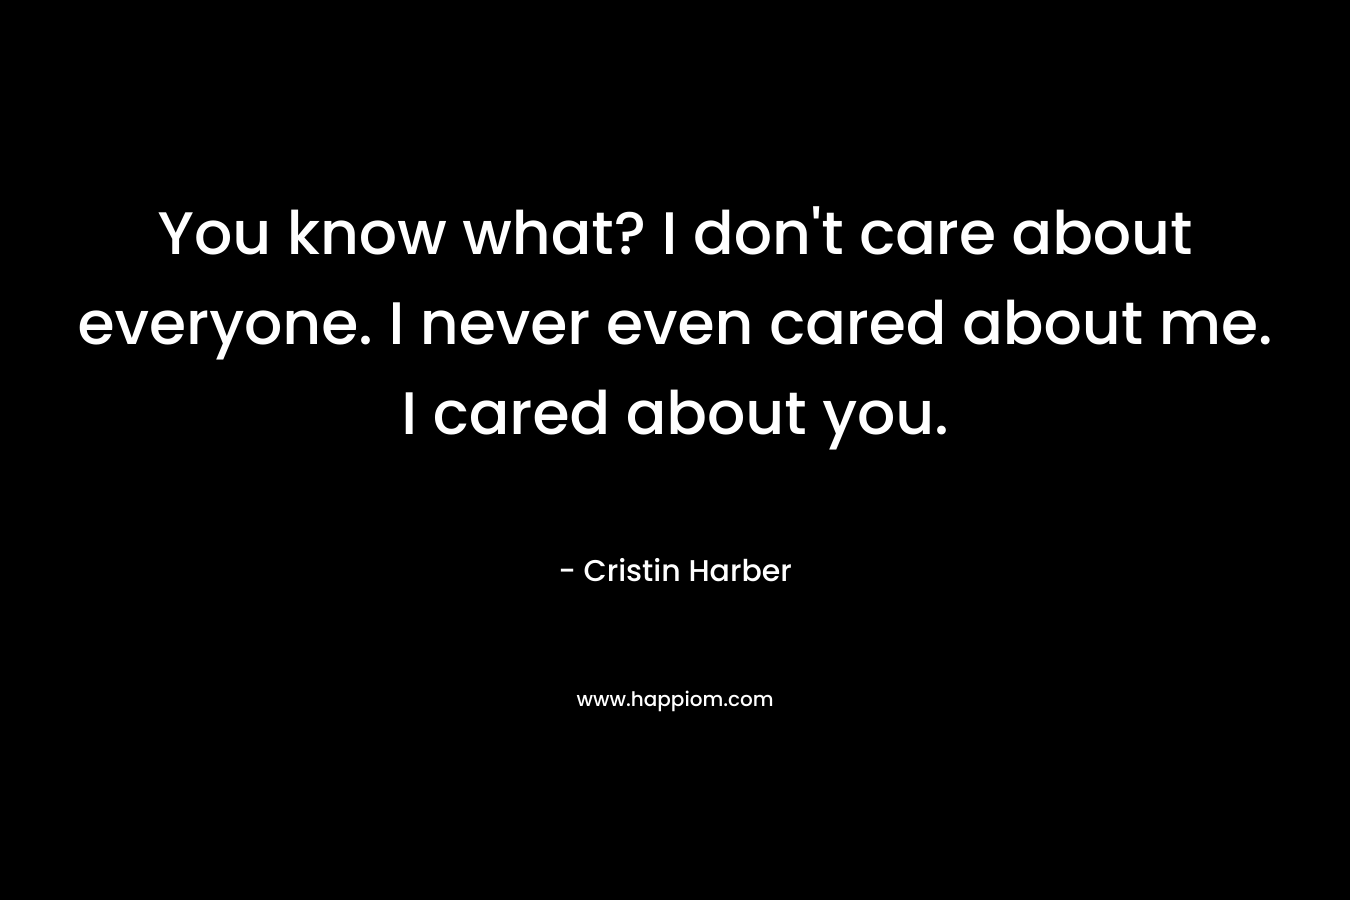 You know what? I don’t care about everyone. I never even cared about me. I cared about you. – Cristin Harber